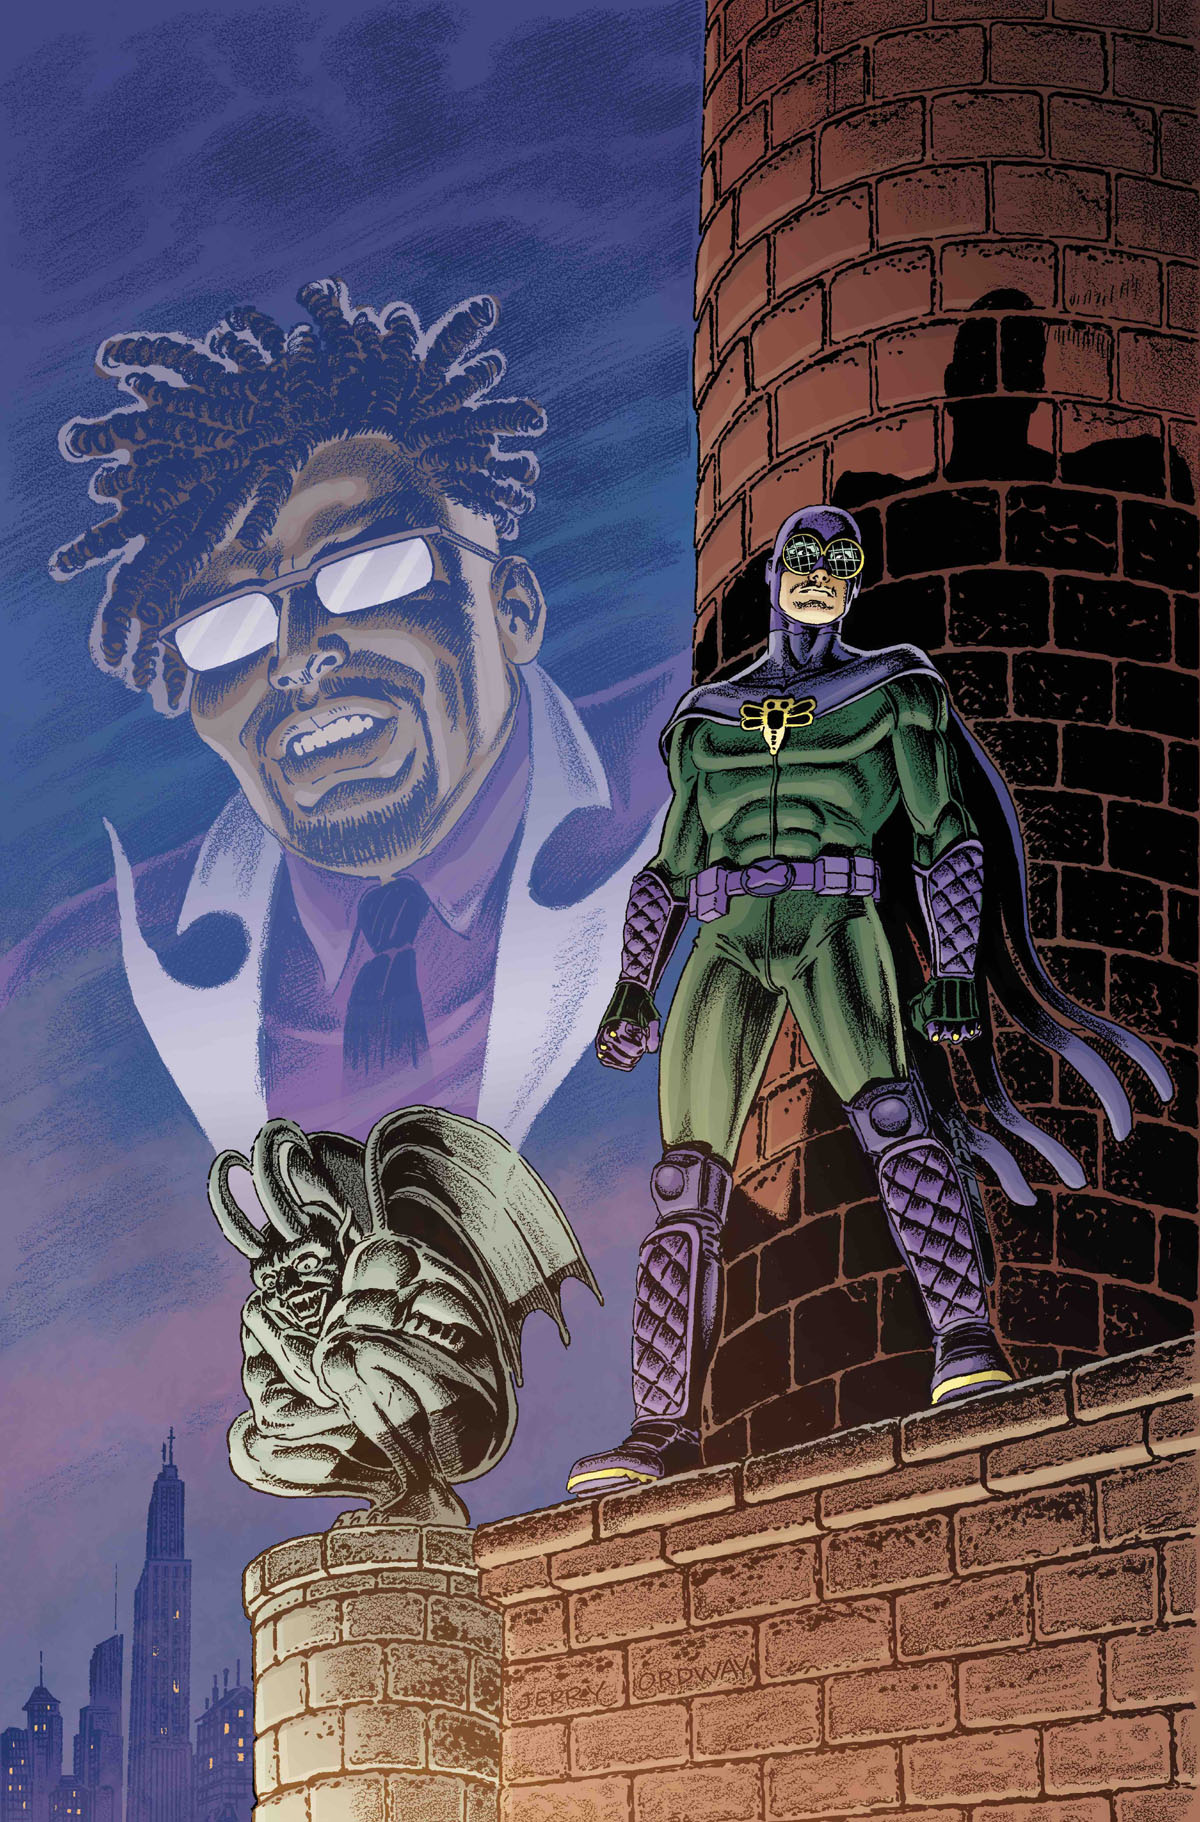 The Wrong Earth: Purple cover by Jerry Ordway